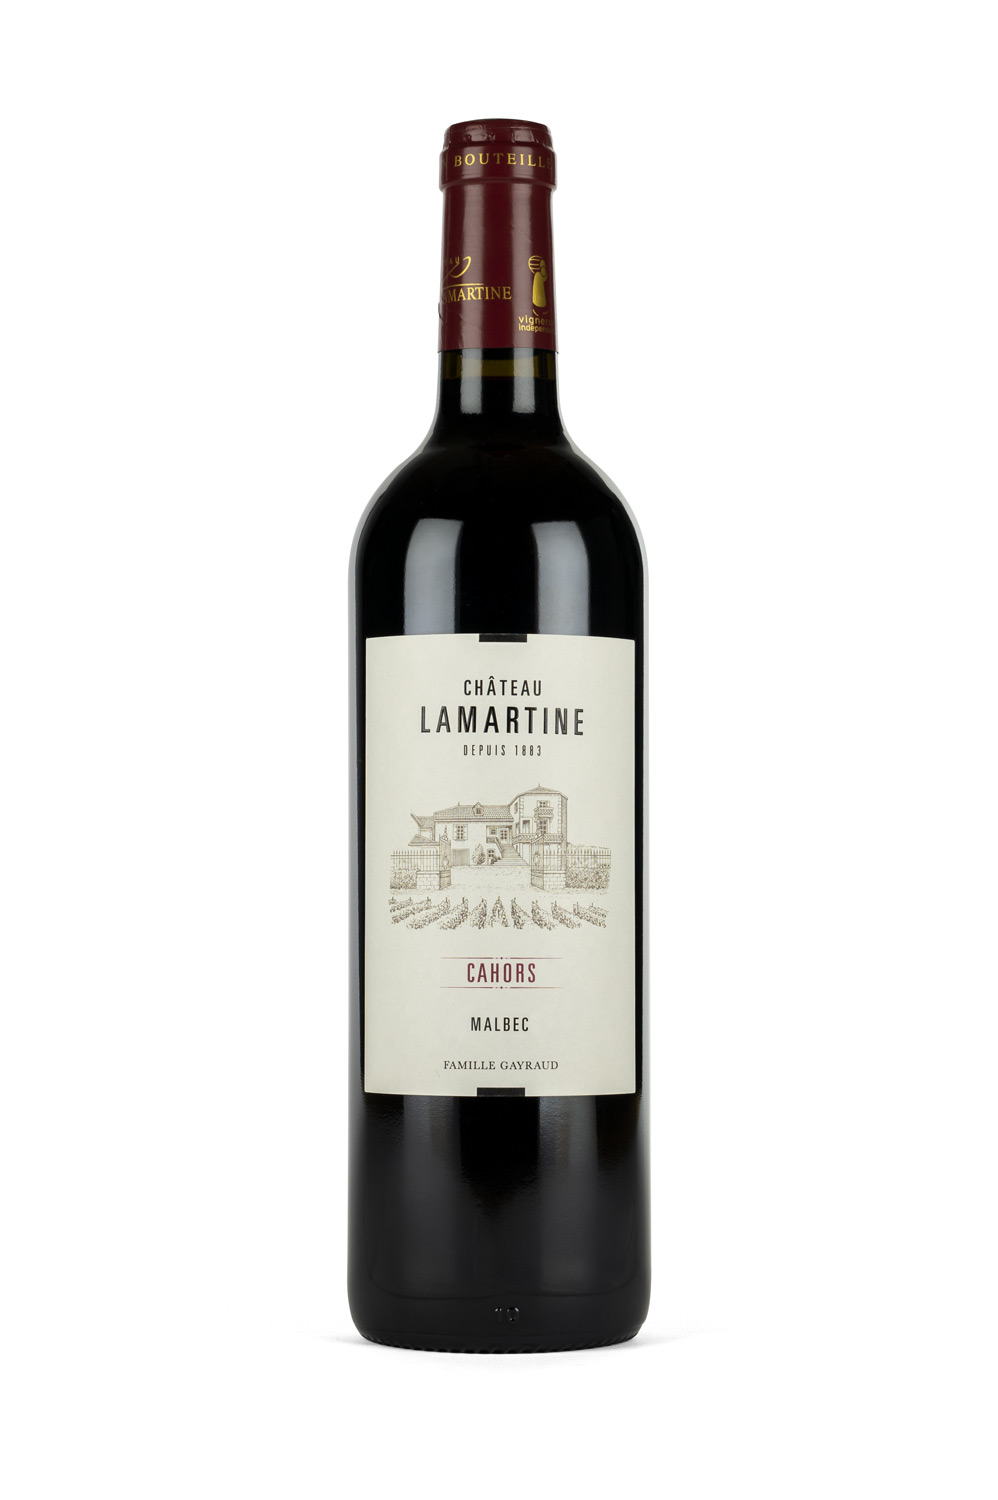 Chateau Lamartine 2019 - Cahors Tradition AOP